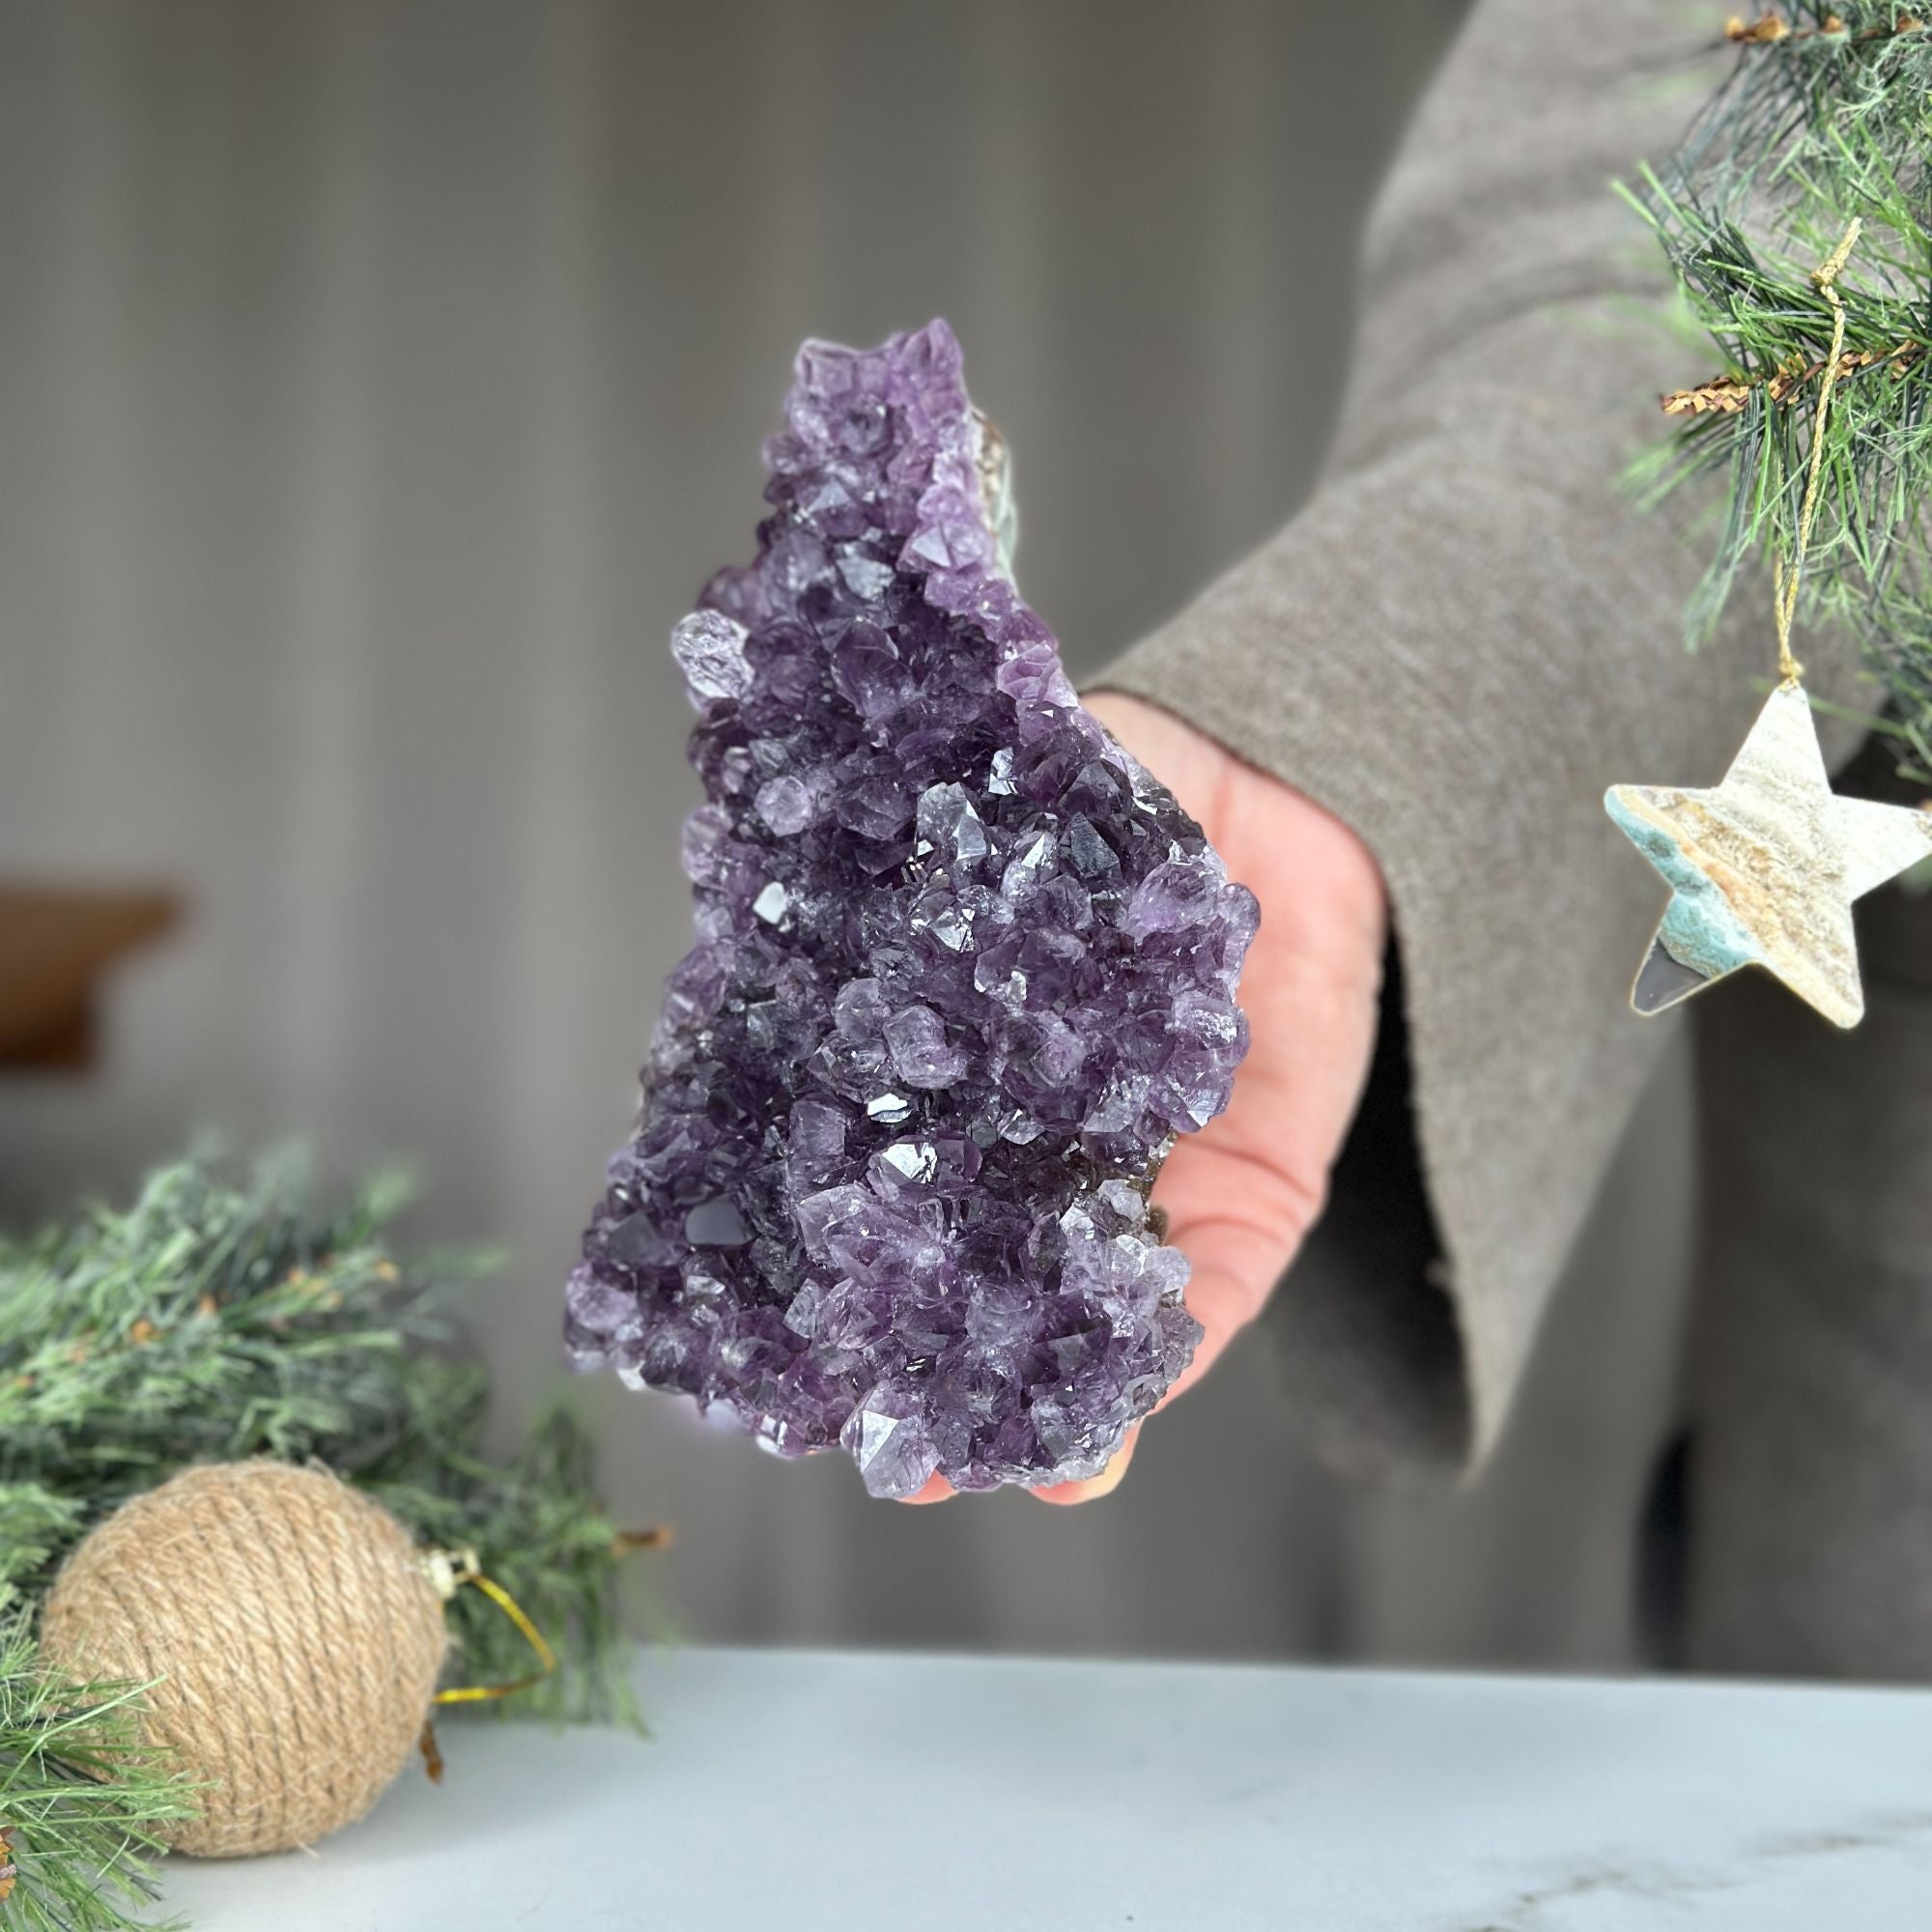 Extra Large Amethyst, Crystal Cluster With Cut Base, 6 to 7 inches amethyst